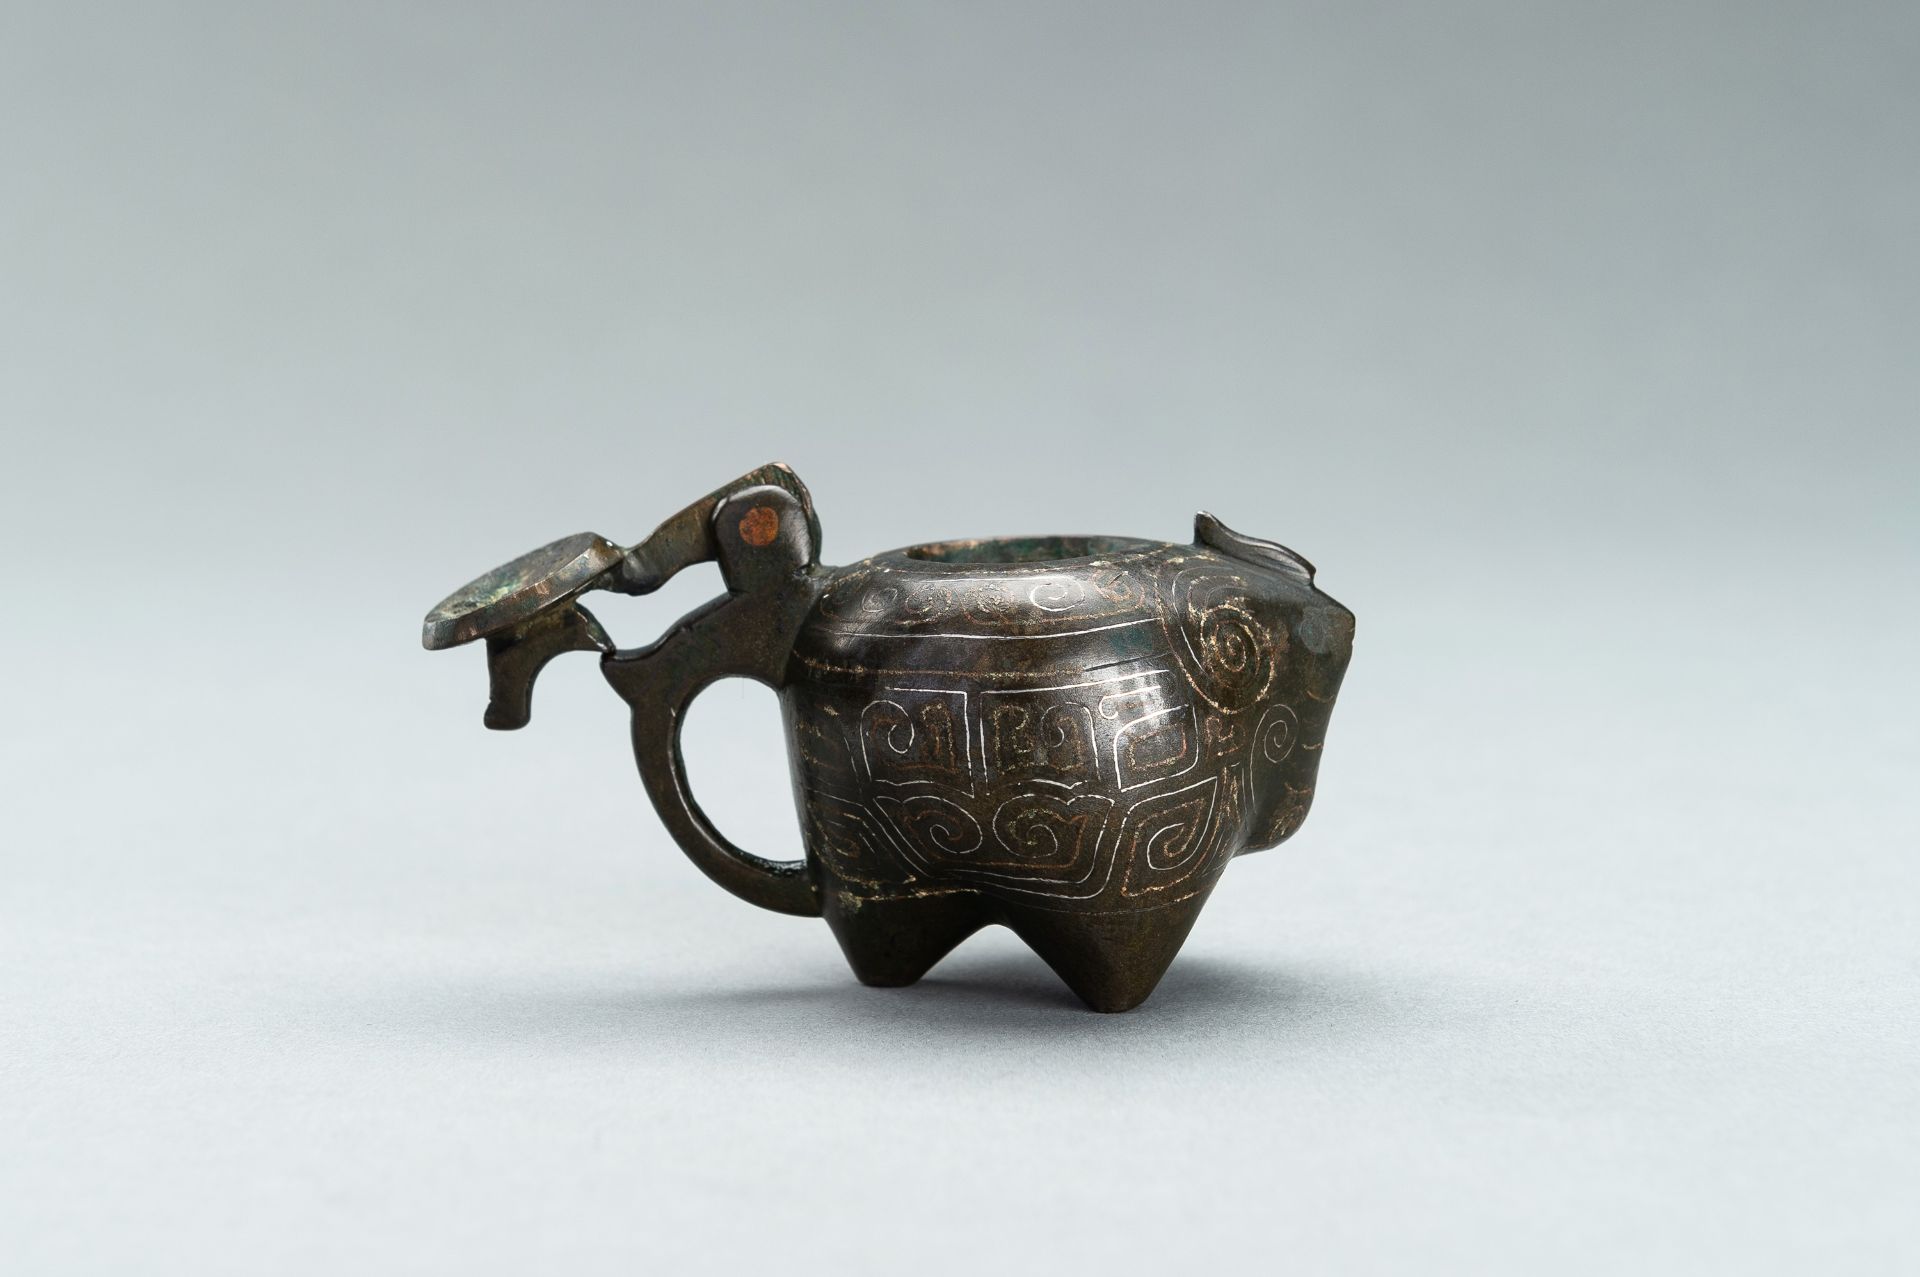 A SMALL COPPER AND SILVER INLAID BRONZE POURING TRIPOD VESSEL IN THE FORM OF AN ANIMAL, 17TH CENTURY - Image 6 of 11